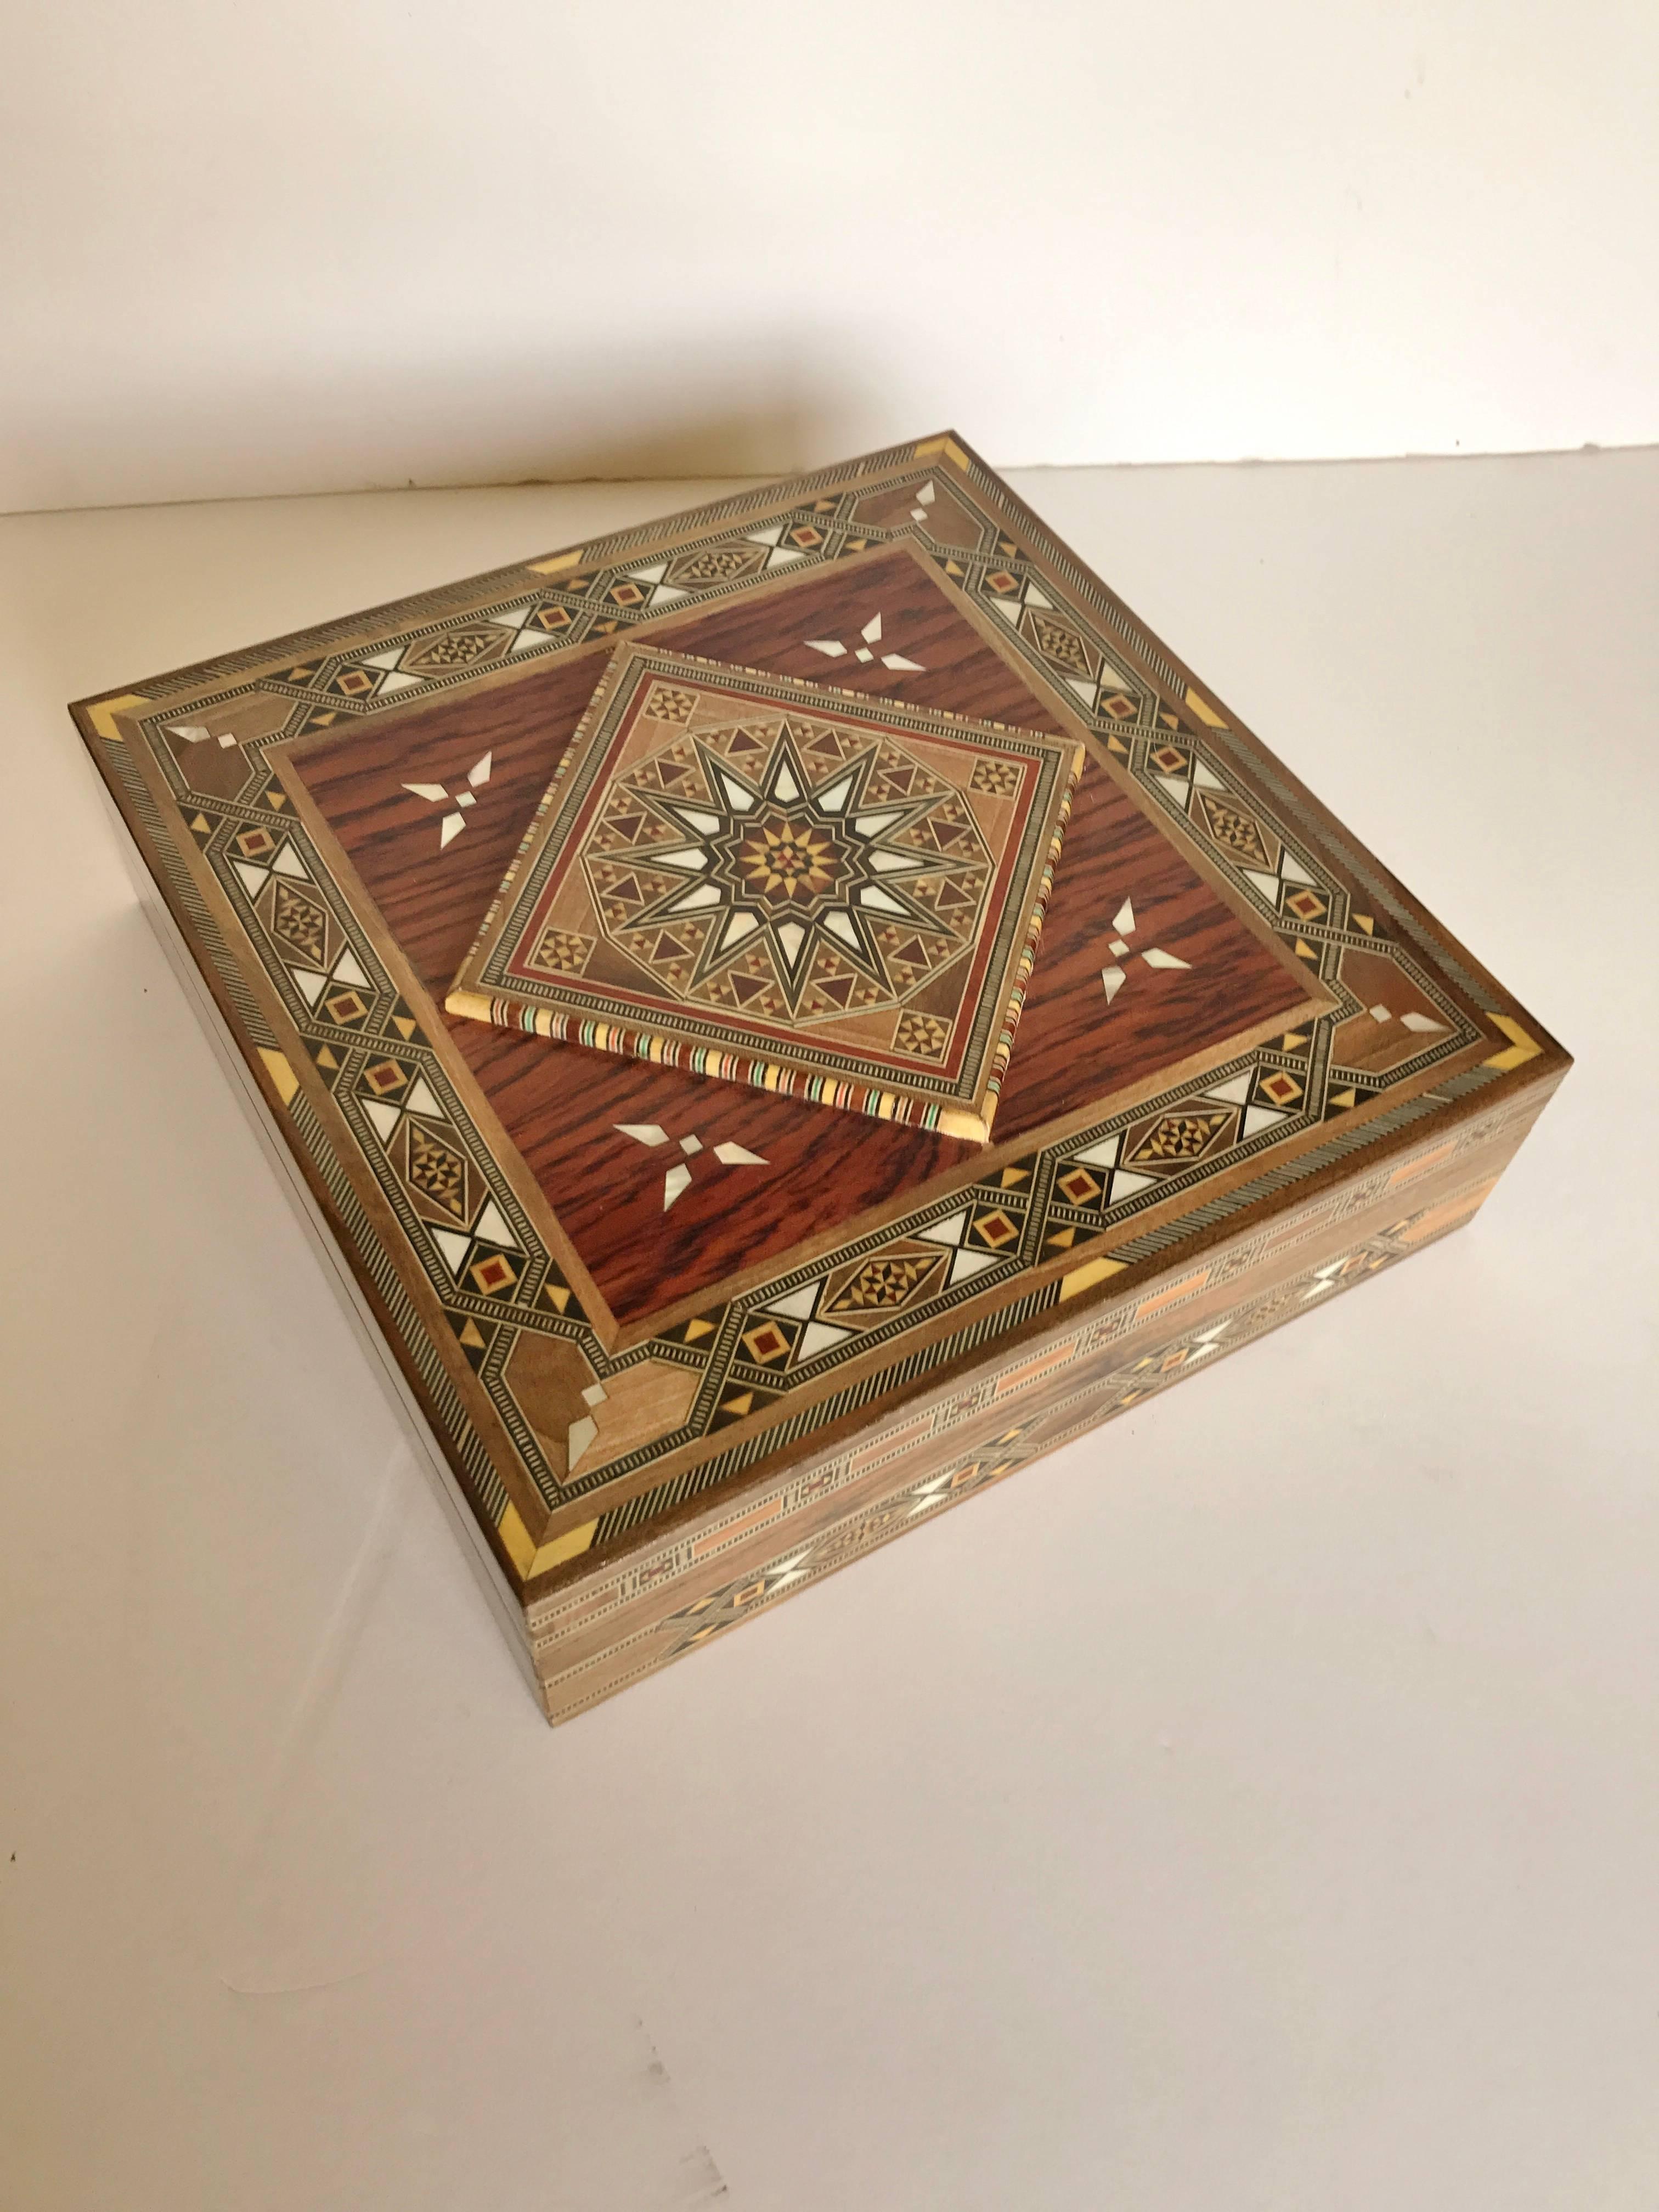 Syrian walnut wood box with fruitwoods and mother-of-pearl. The box has a raised center diamond design with very intricated inlay. It is lined in a cream leather. Handmade by skilled Syrian craftsmen from Damascus. In new condition, several